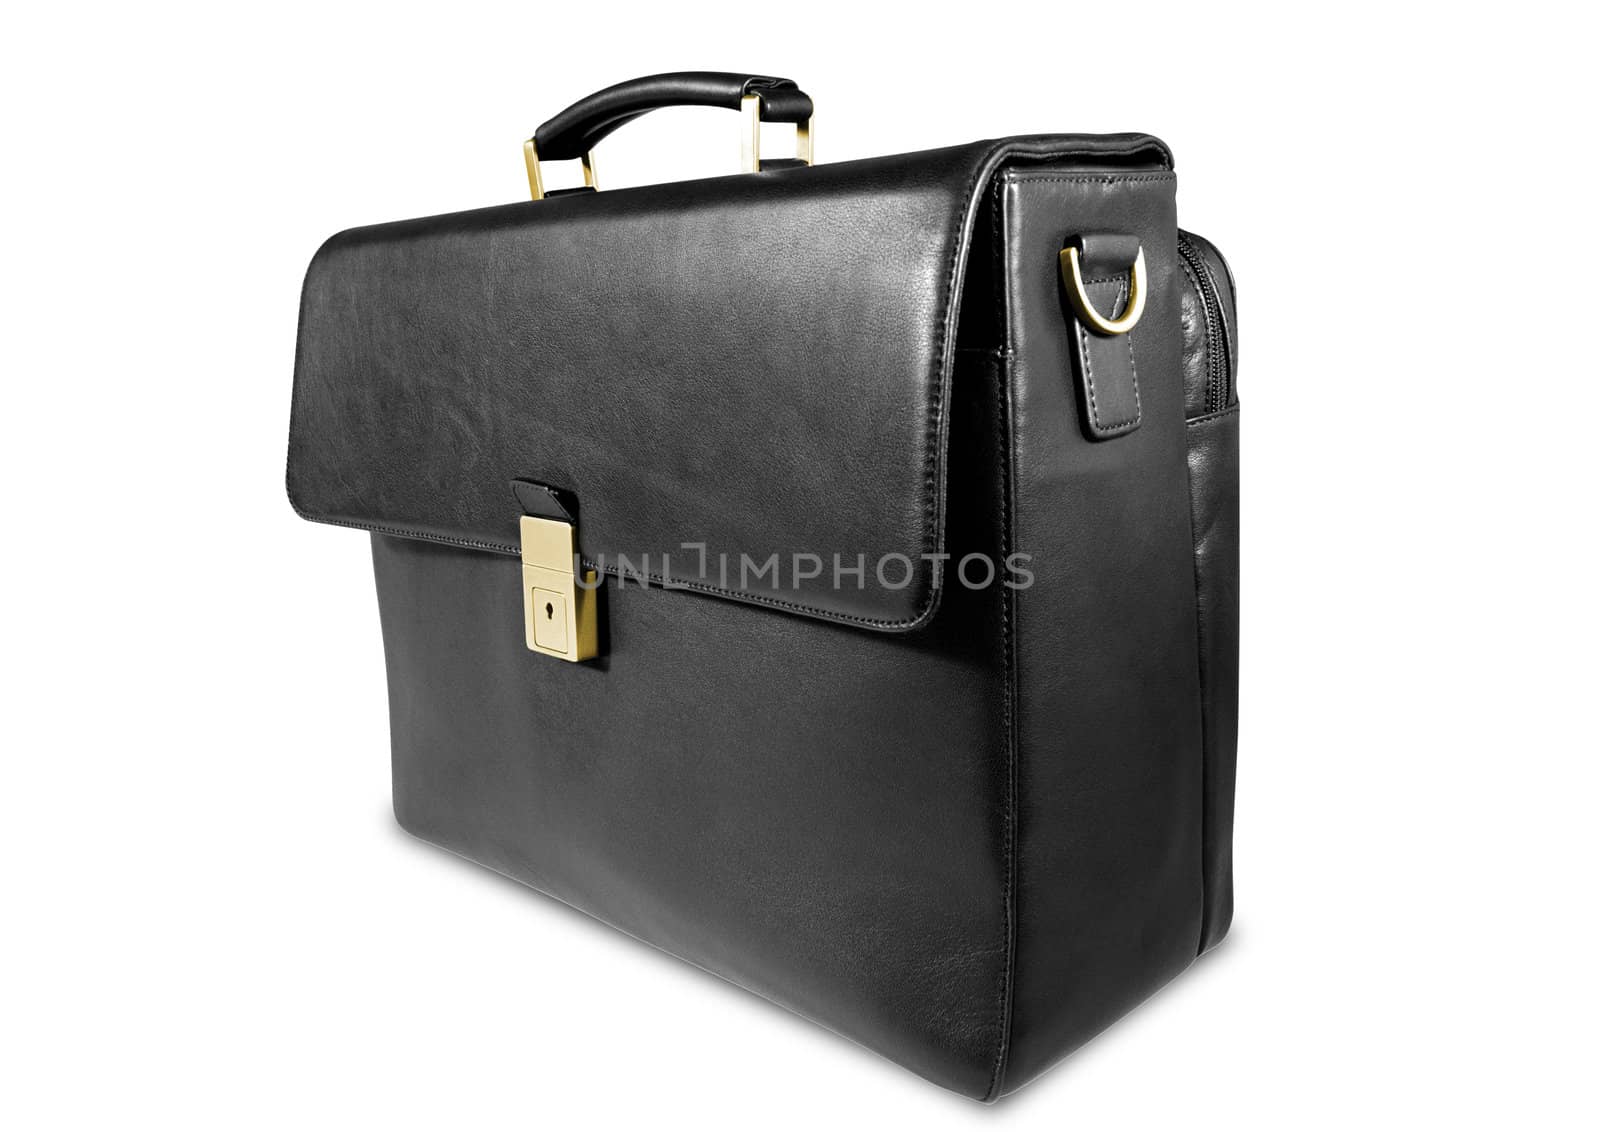 Fashionable leather briefcase by shutswis